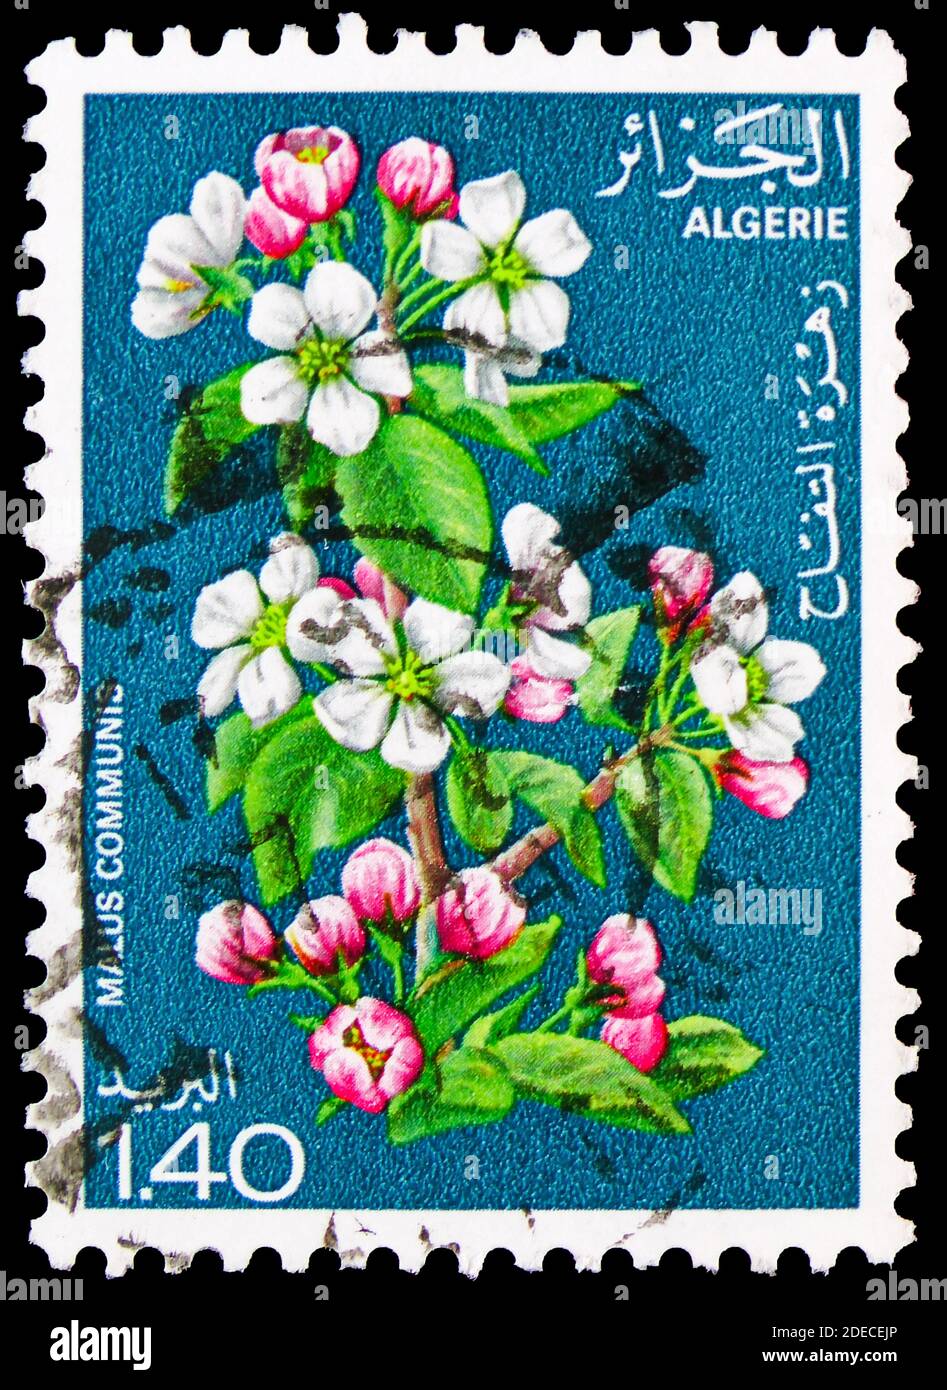 MOSCOW, RUSSIA - OCTOBER 17, 2020: Postage stamp printed in Algeria shows Apple, Flowering Trees serie, circa 1978 Stock Photo